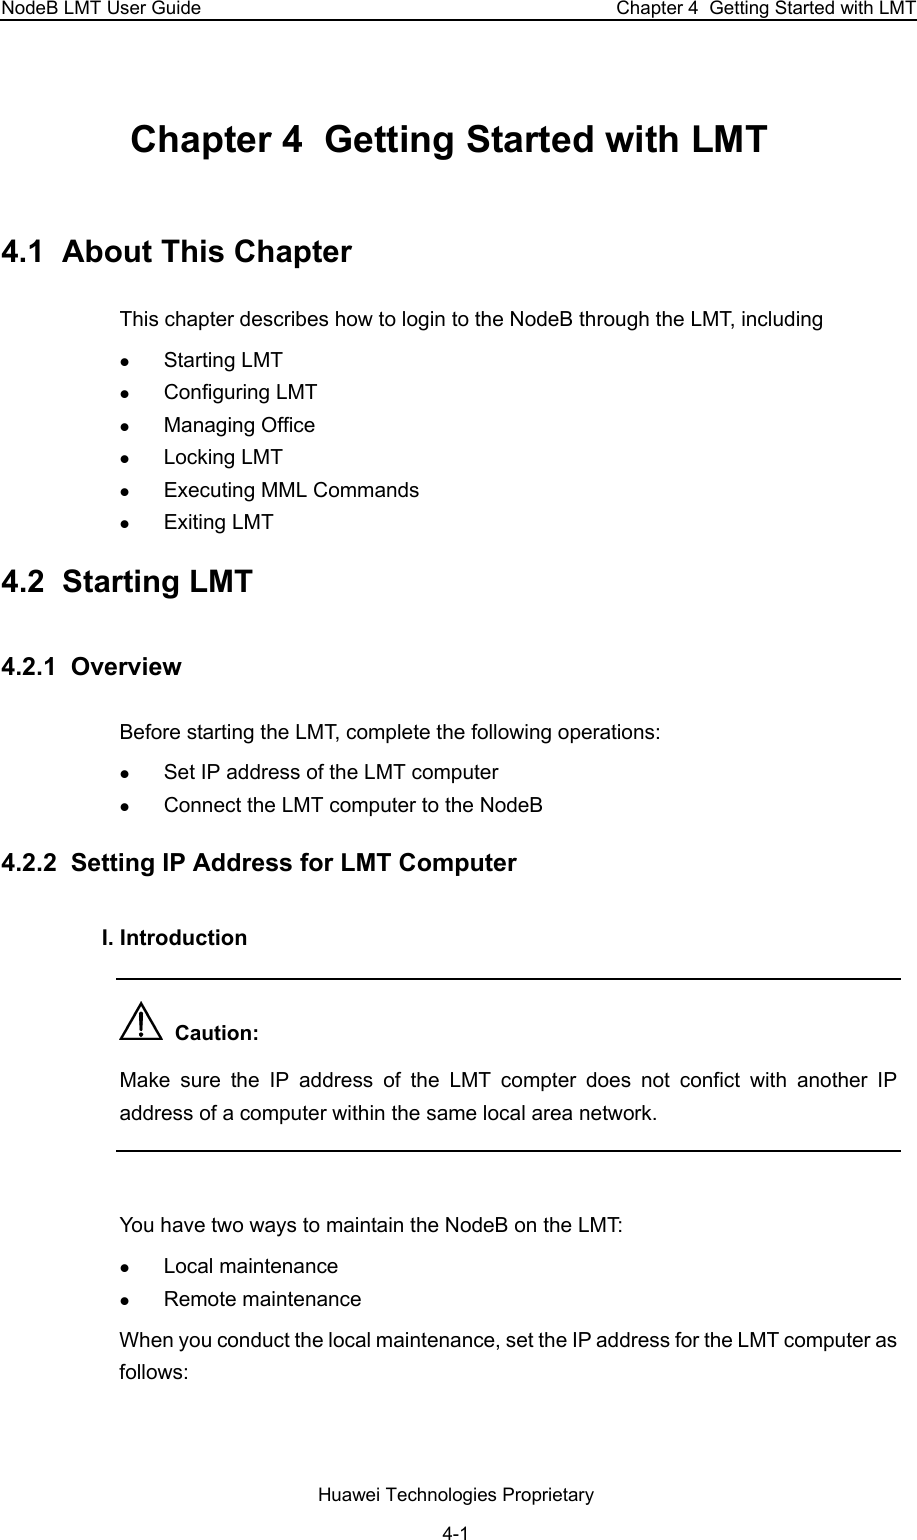 NodeB LMT User Guide  Chapter 4  Getting Started with LMT Chapter 4  Getting Started with LMT 4.1  About This Chapter This chapter describes how to login to the NodeB through the LMT, including z Starting LMT z Configuring LMT z Managing Office z Locking LMT z Executing MML Commands z Exiting LMT 4.2  Starting LMT 4.2.1  Overview Before starting the LMT, complete the following operations: z Set IP address of the LMT computer  z Connect the LMT computer to the NodeB  4.2.2  Setting IP Address for LMT Computer I. Introduction   Caution:  Make sure the IP address of the LMT compter does not confict with another IP address of a computer within the same local area network.   You have two ways to maintain the NodeB on the LMT:  z Local maintenance  z Remote maintenance  When you conduct the local maintenance, set the IP address for the LMT computer as follows:  Huawei Technologies Proprietary 4-1 